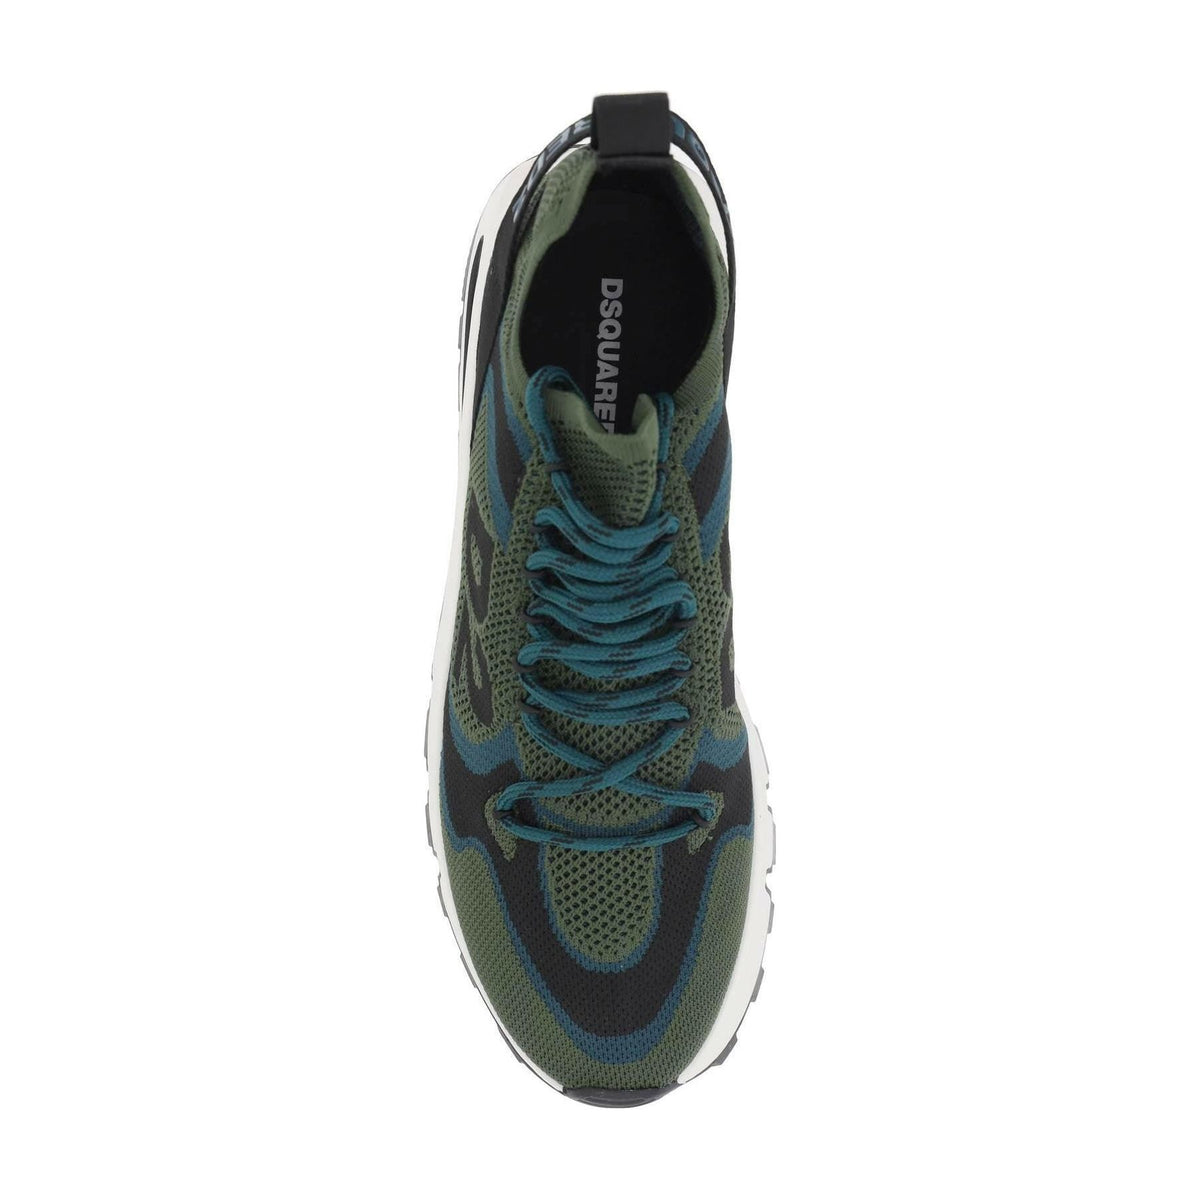 Military Teal Black Recycled Fabric Run Ds2 Sneakers DSQUARED2 JOHN JULIA.